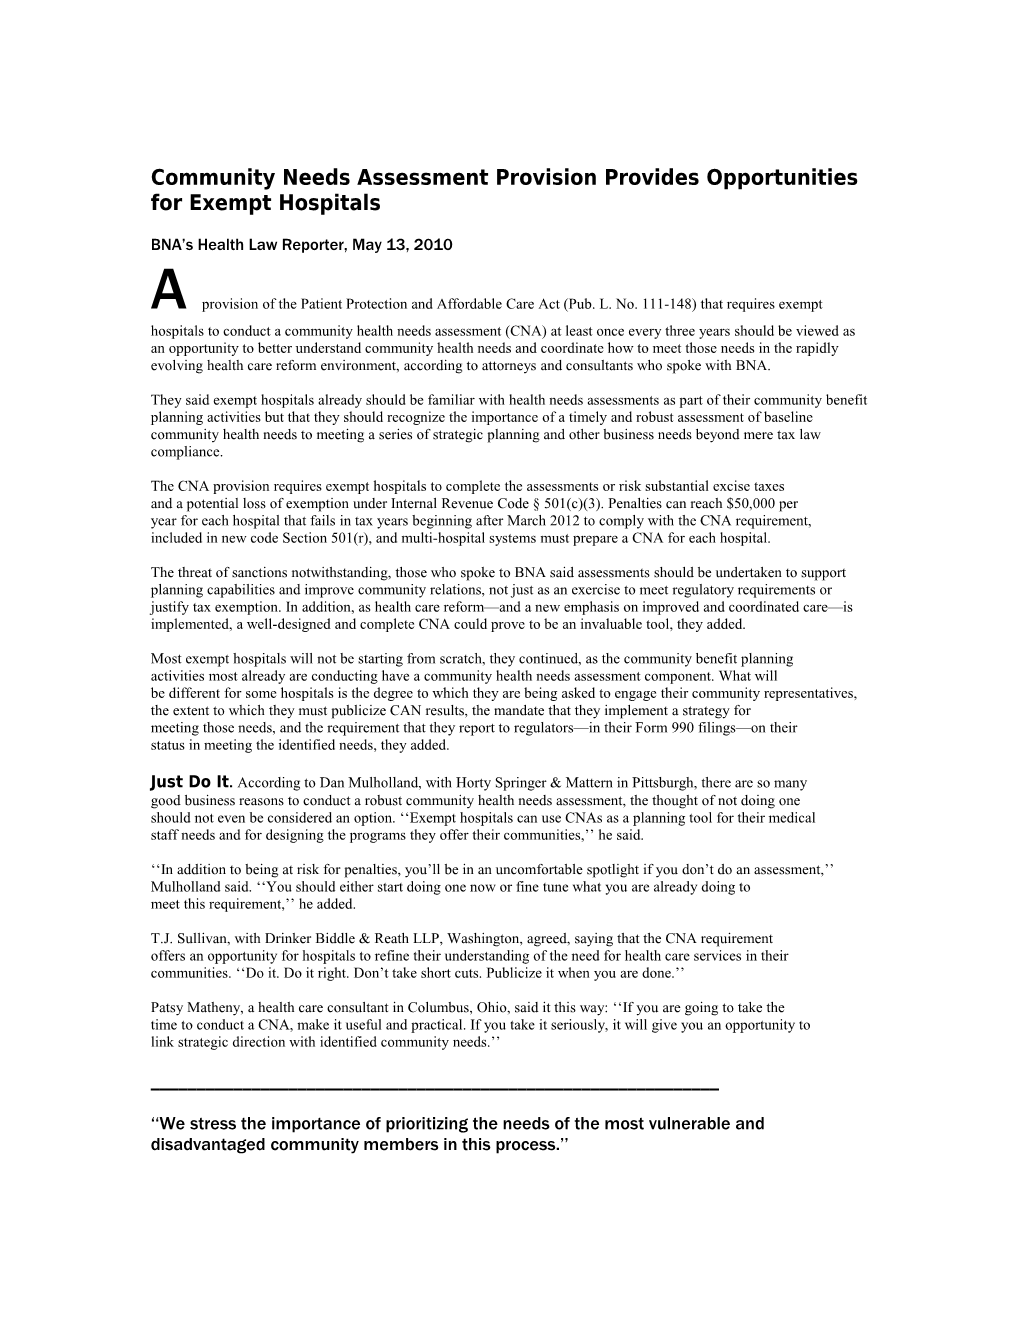 Community Needs Assessment Provision Provides Opportunities for Exempt Hospitals